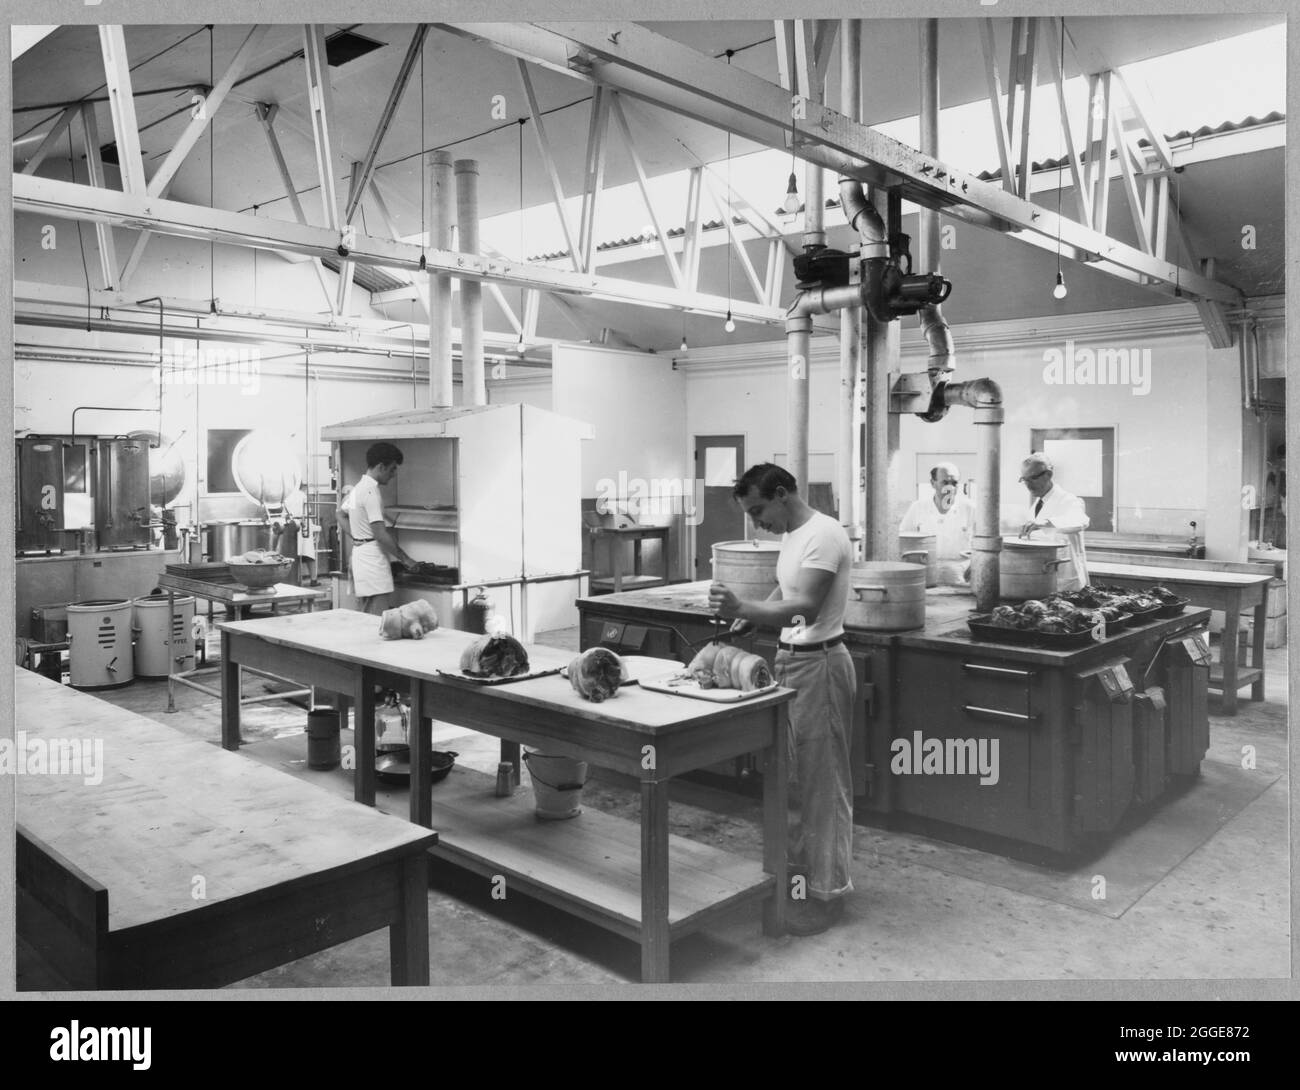 The kitchen of the Balfour Beatty camp on the Berkeley Nuclear Power Station construction site with four men cooking and preparing food for the workers. This image was catalogued as part of the Breaking New Ground Project in partnership with the John Laing Charitable Trust in 2019-20. Stock Photo